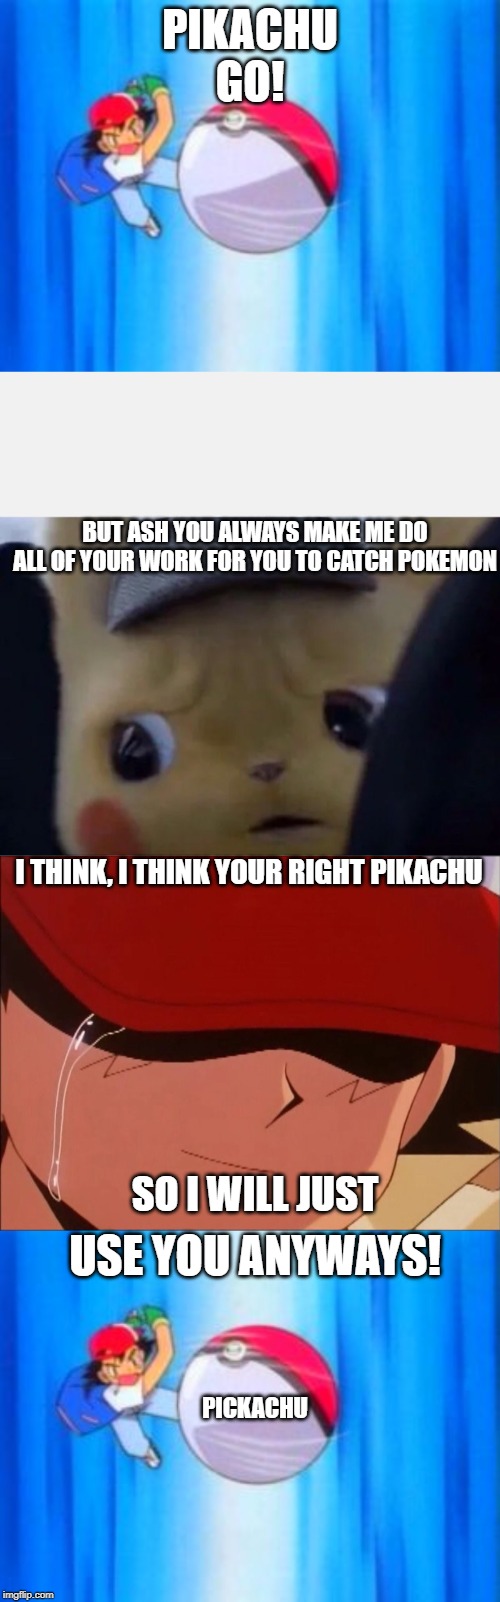 WHEN PIKACHU GETS TO LAZY TO FIGHT AND MAKES HIM NOT FIGHT | PIKACHU GO! BUT ASH YOU ALWAYS MAKE ME DO ALL OF YOUR WORK FOR YOU TO CATCH POKEMON; I THINK, I THINK YOUR RIGHT PIKACHU; SO I WILL JUST; USE YOU ANYWAYS! PICKACHU | image tagged in ash throws pokball,sad and funny,detective pikachu | made w/ Imgflip meme maker